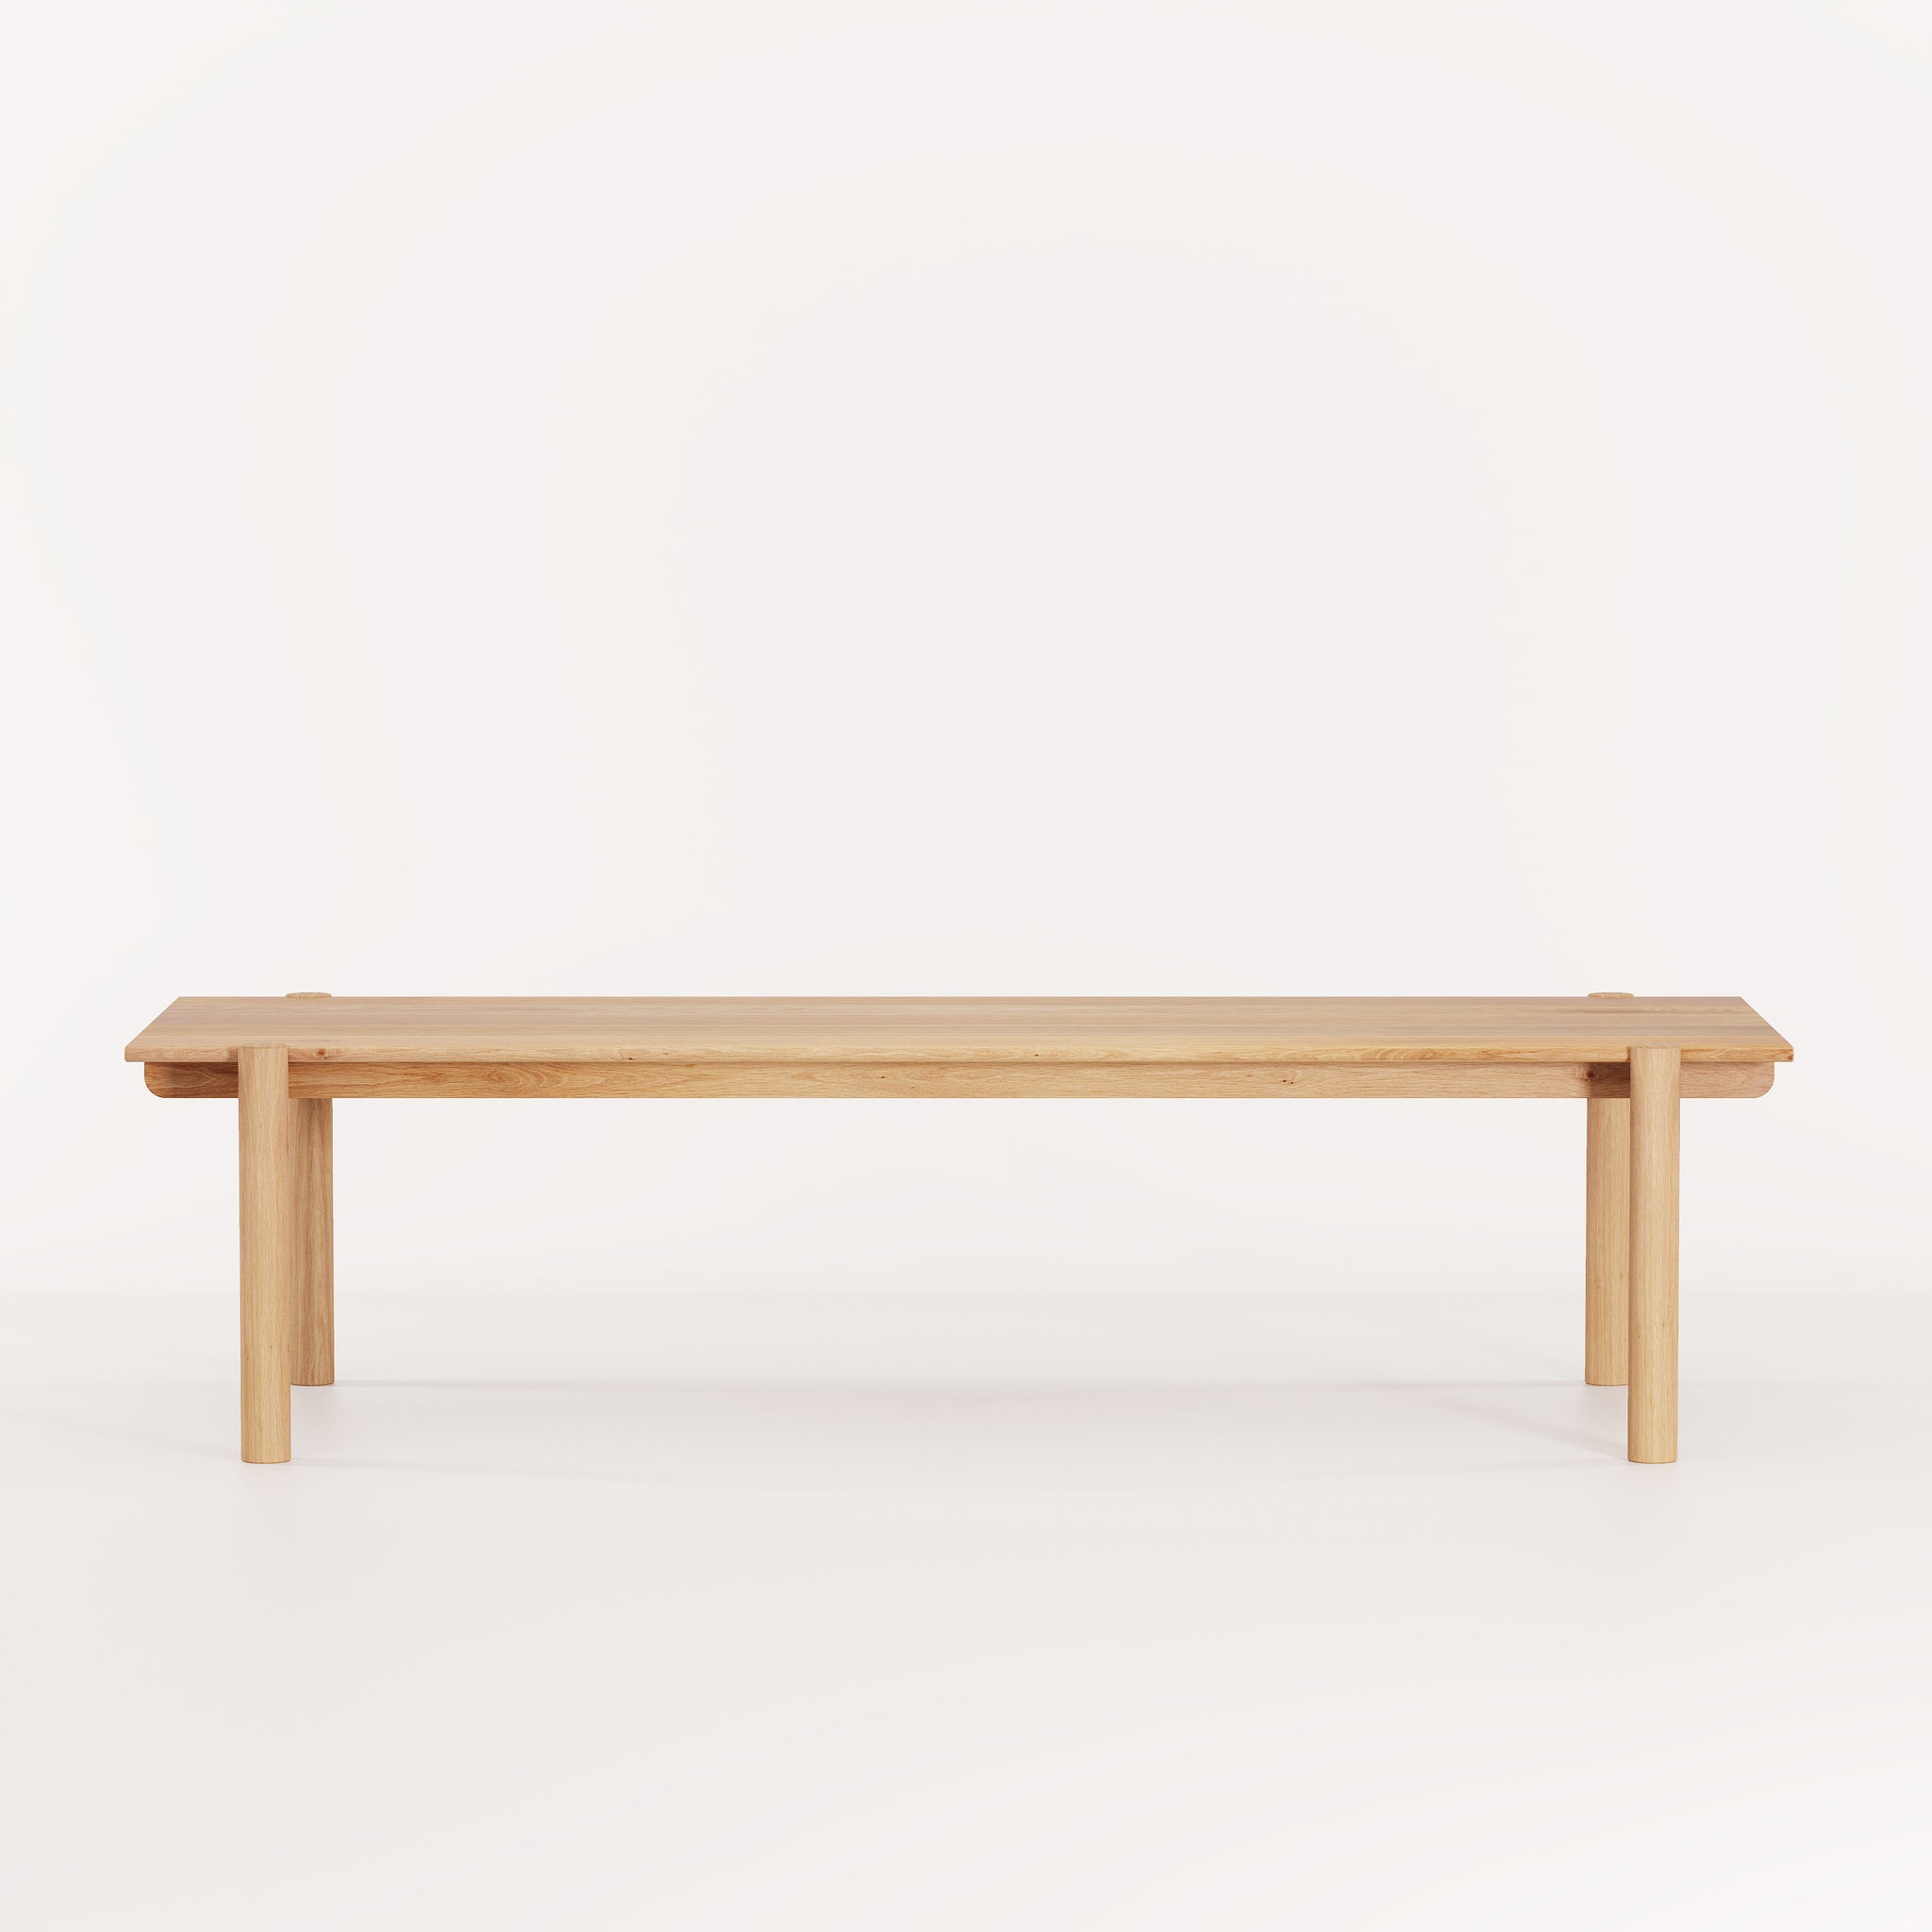 A modern Australian made timber dining table by Mast Furniture.